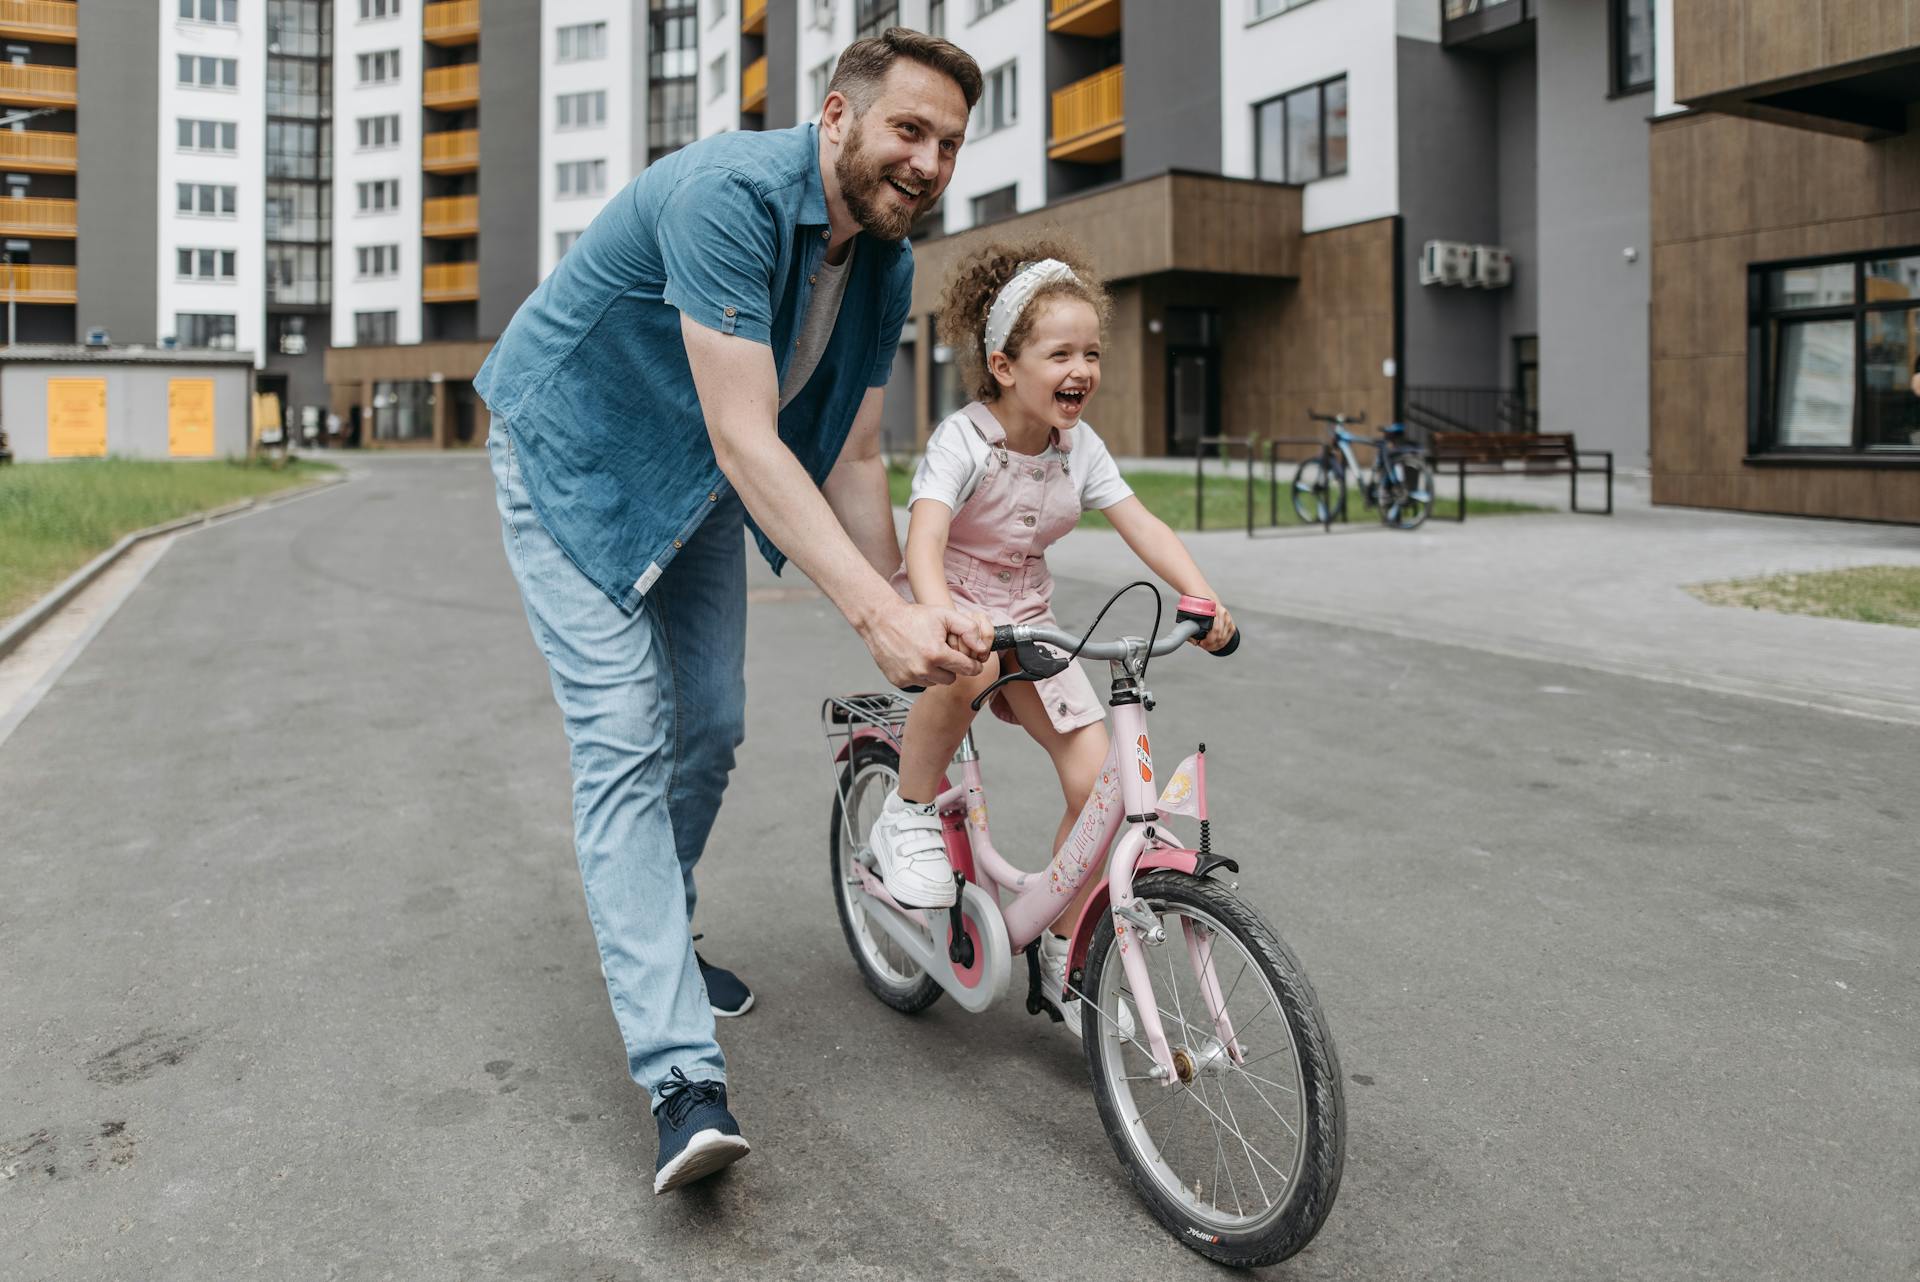 Father Guiding Her Daughter Riding a Bike